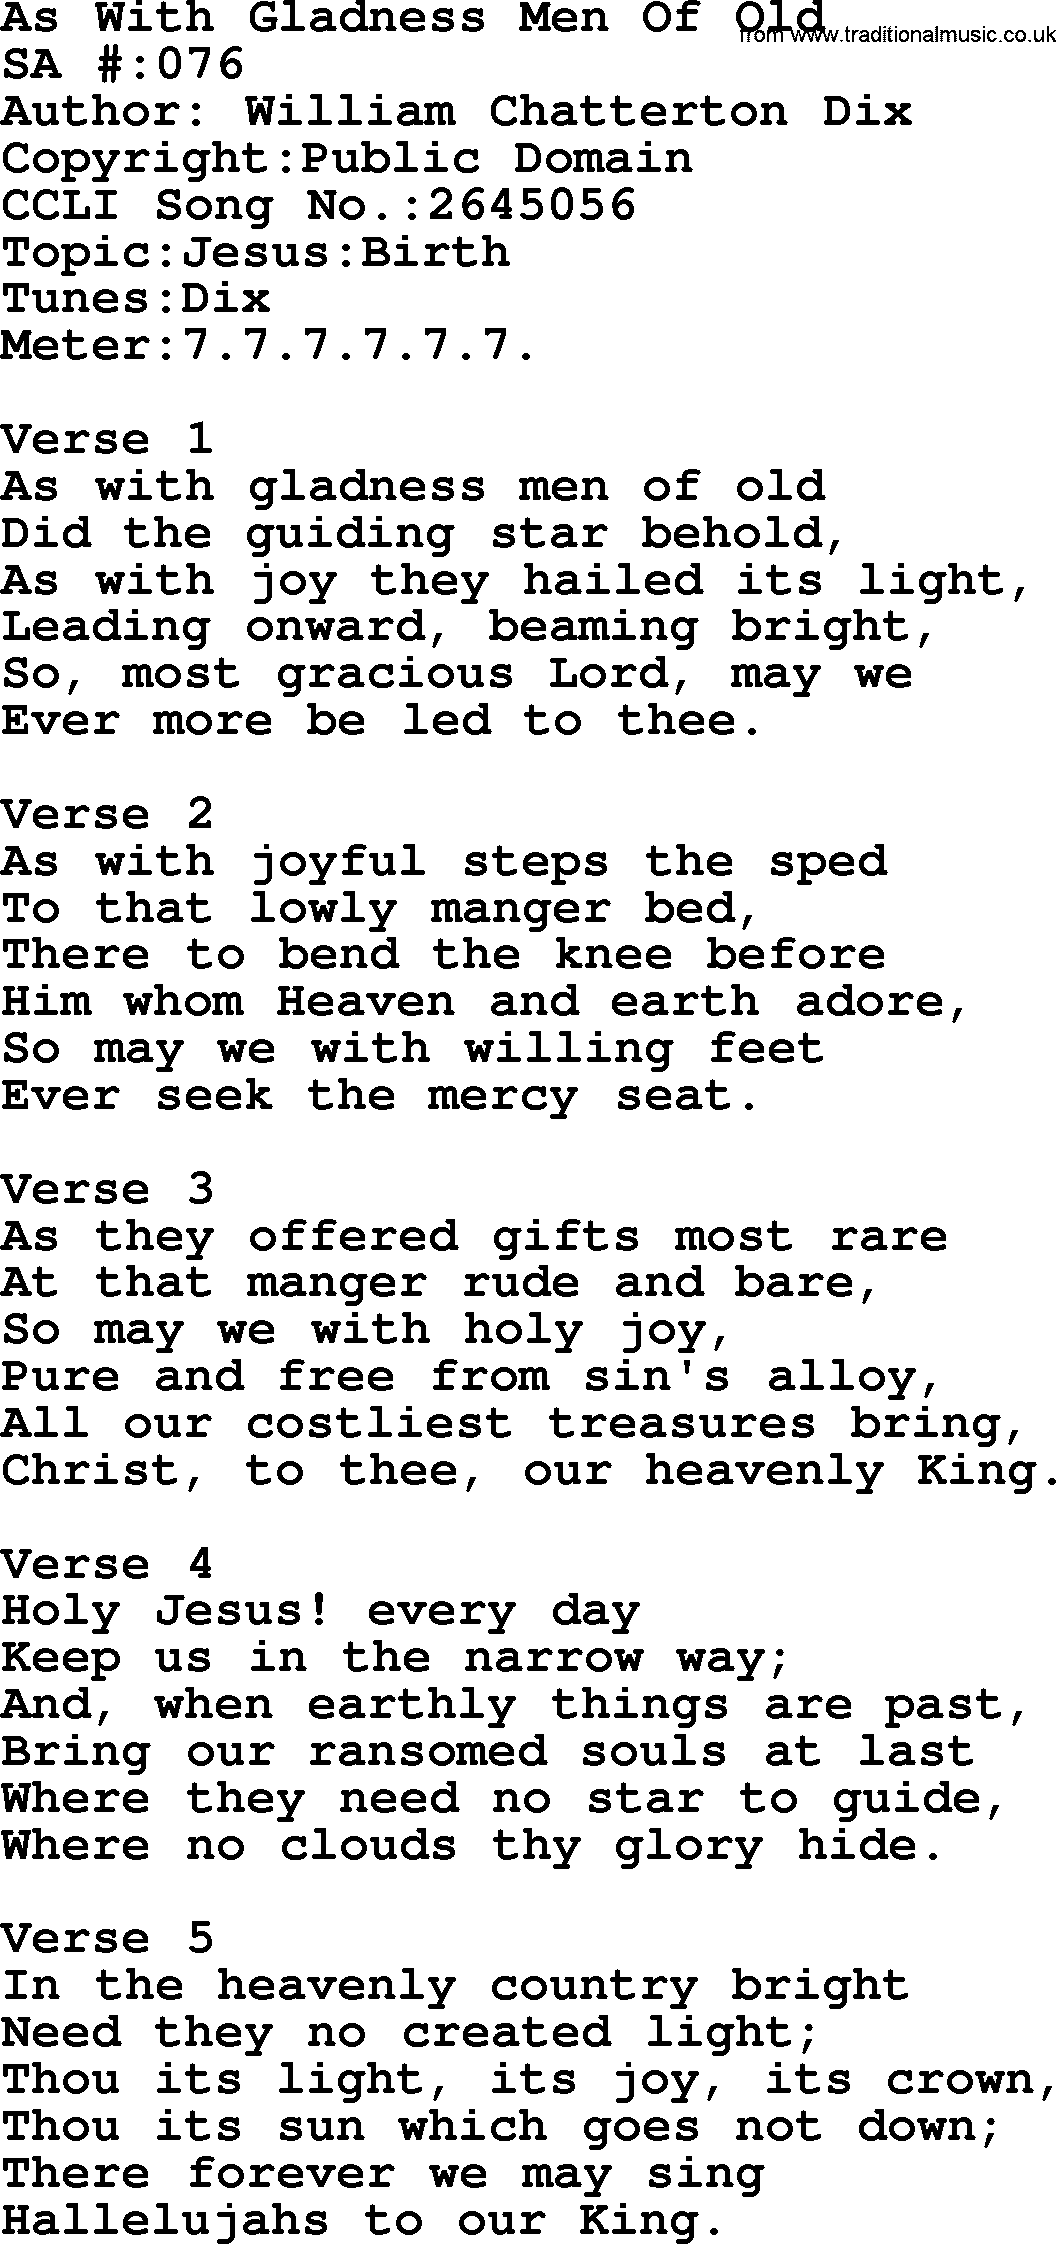 Salvation Army Hymnal, title: As With Gladness Men Of Old, with lyrics and PDF,